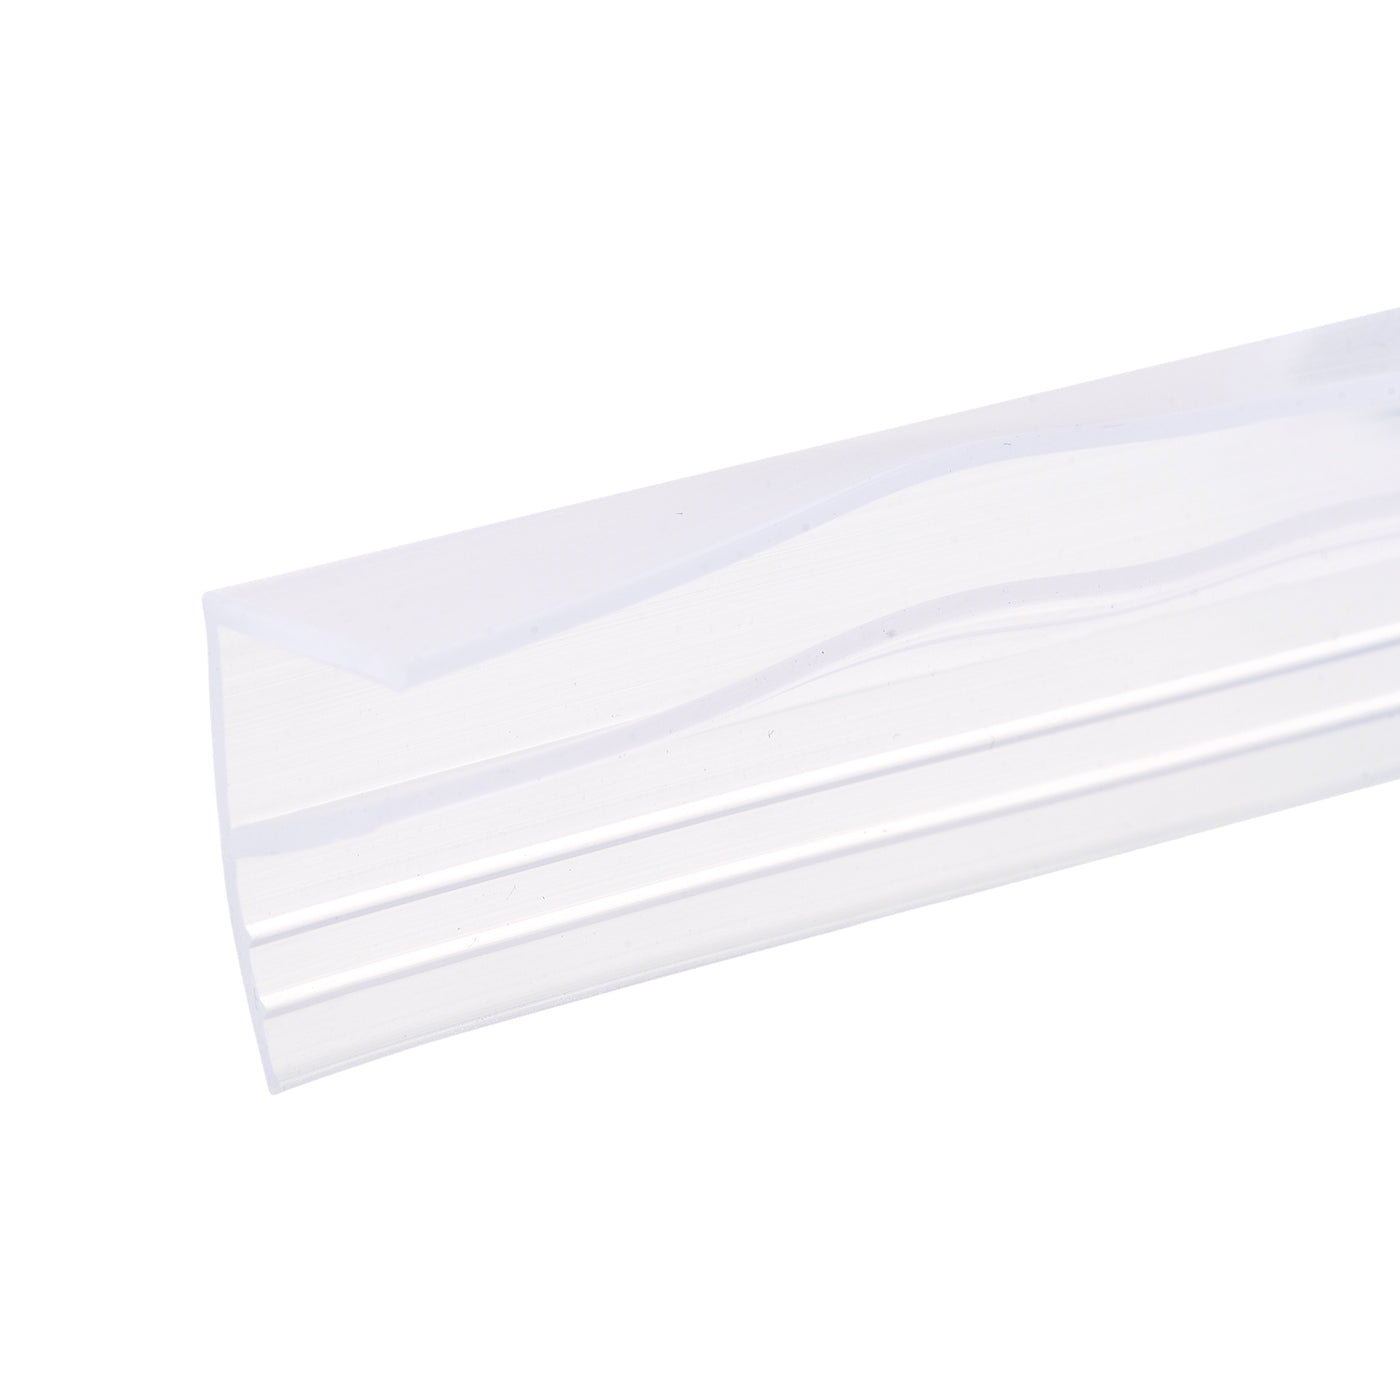 Uxcell Uxcell Frameless Glass Shower Door Sweep 59.06" for 3/8"(10mm) Glass F-Type Seal Strip